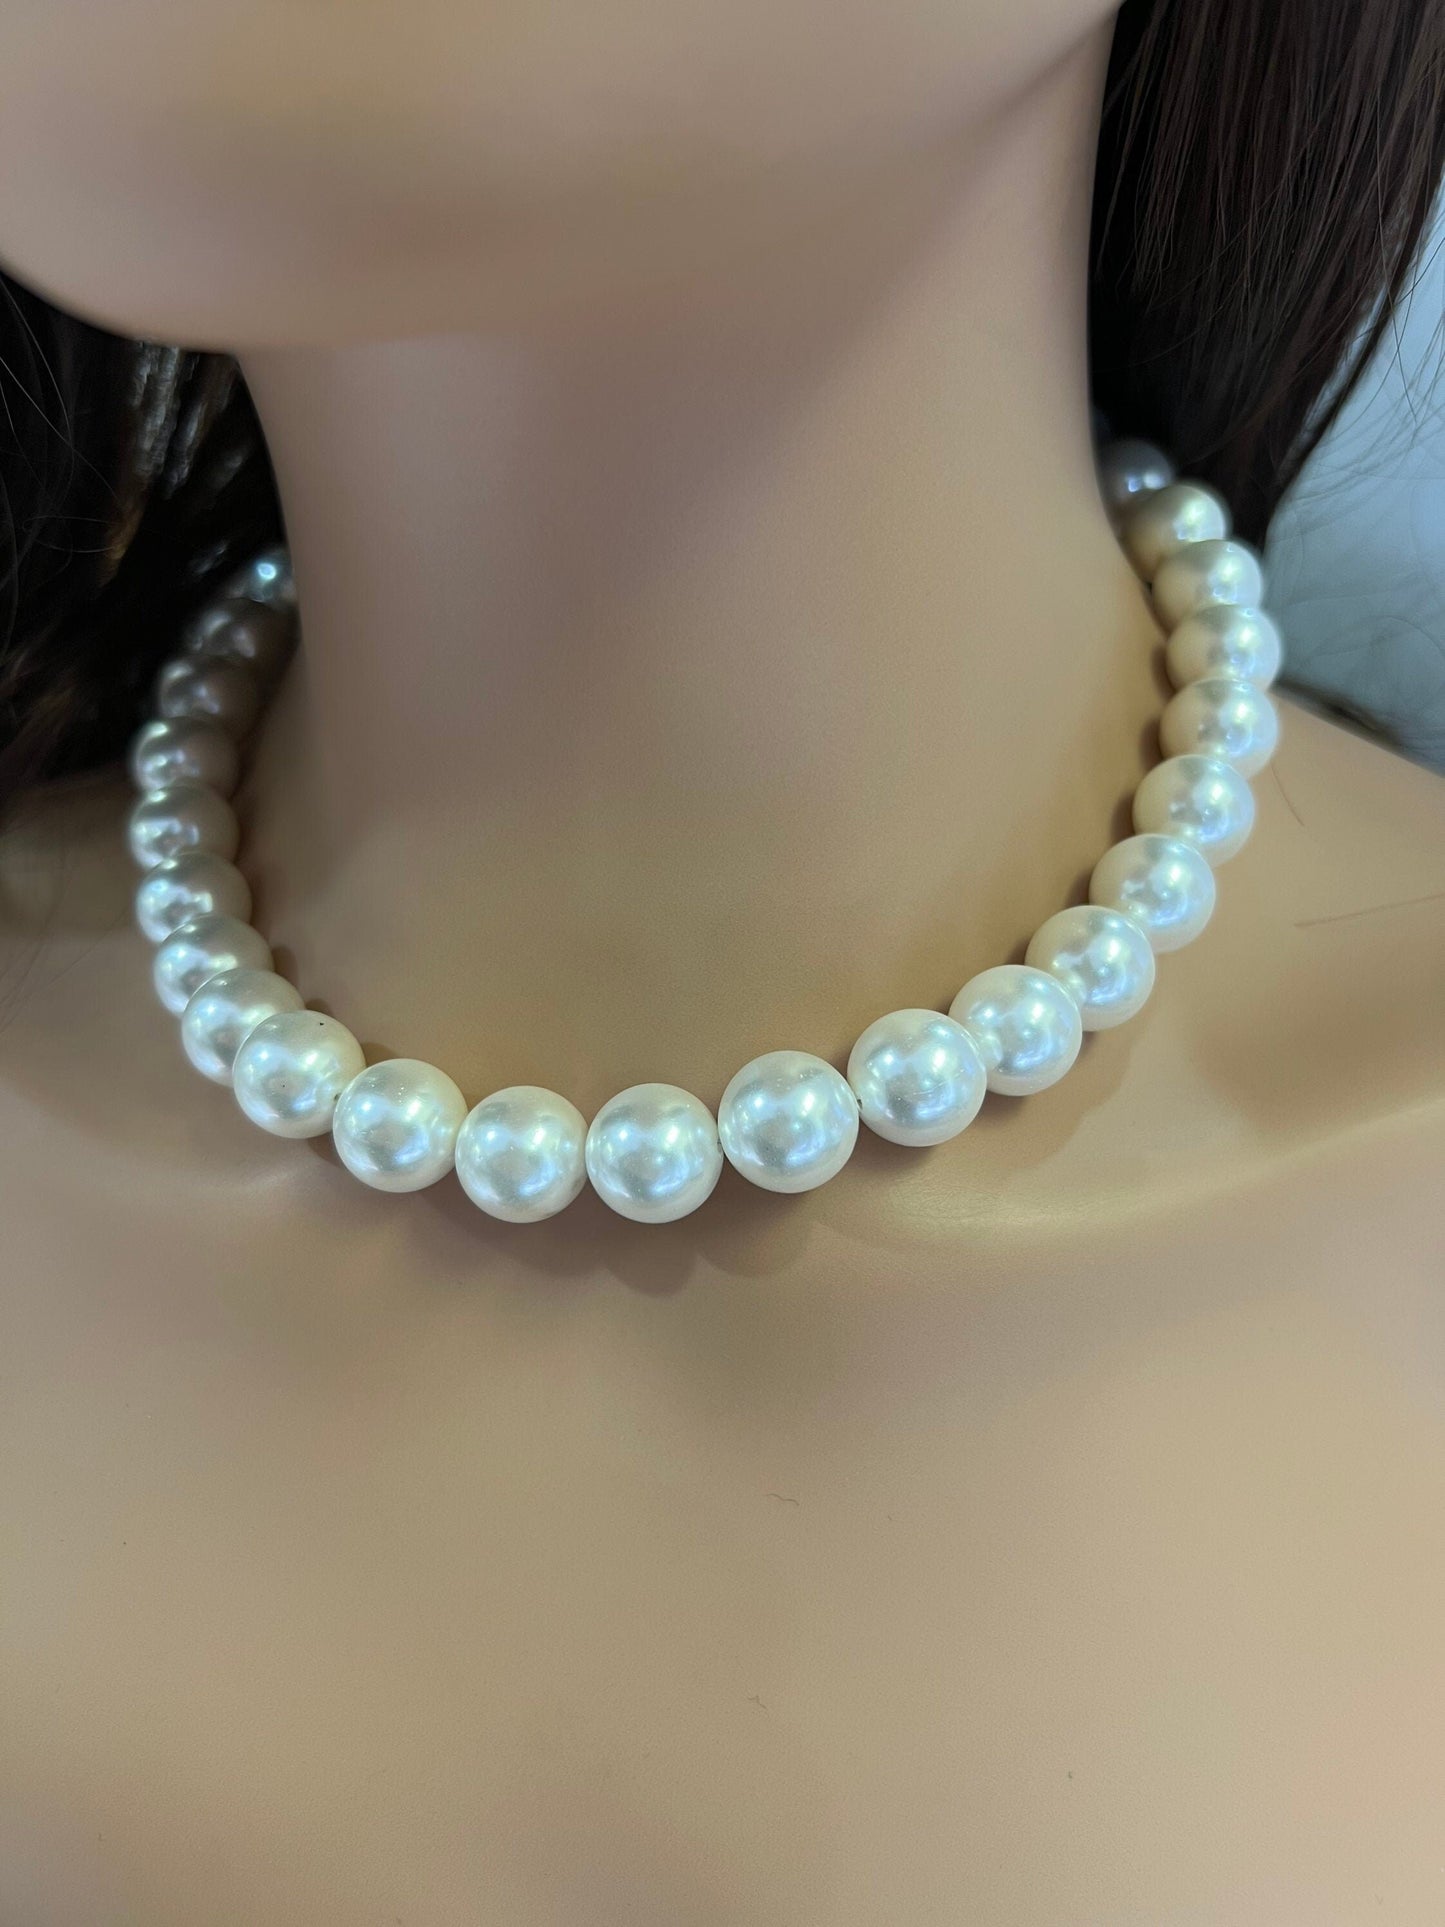 14mm large White South Seashell Pearl Round Statement Necklace with Strong CZ Magnetic Clasp, elegant Bridesmaids wedding evening wear gift